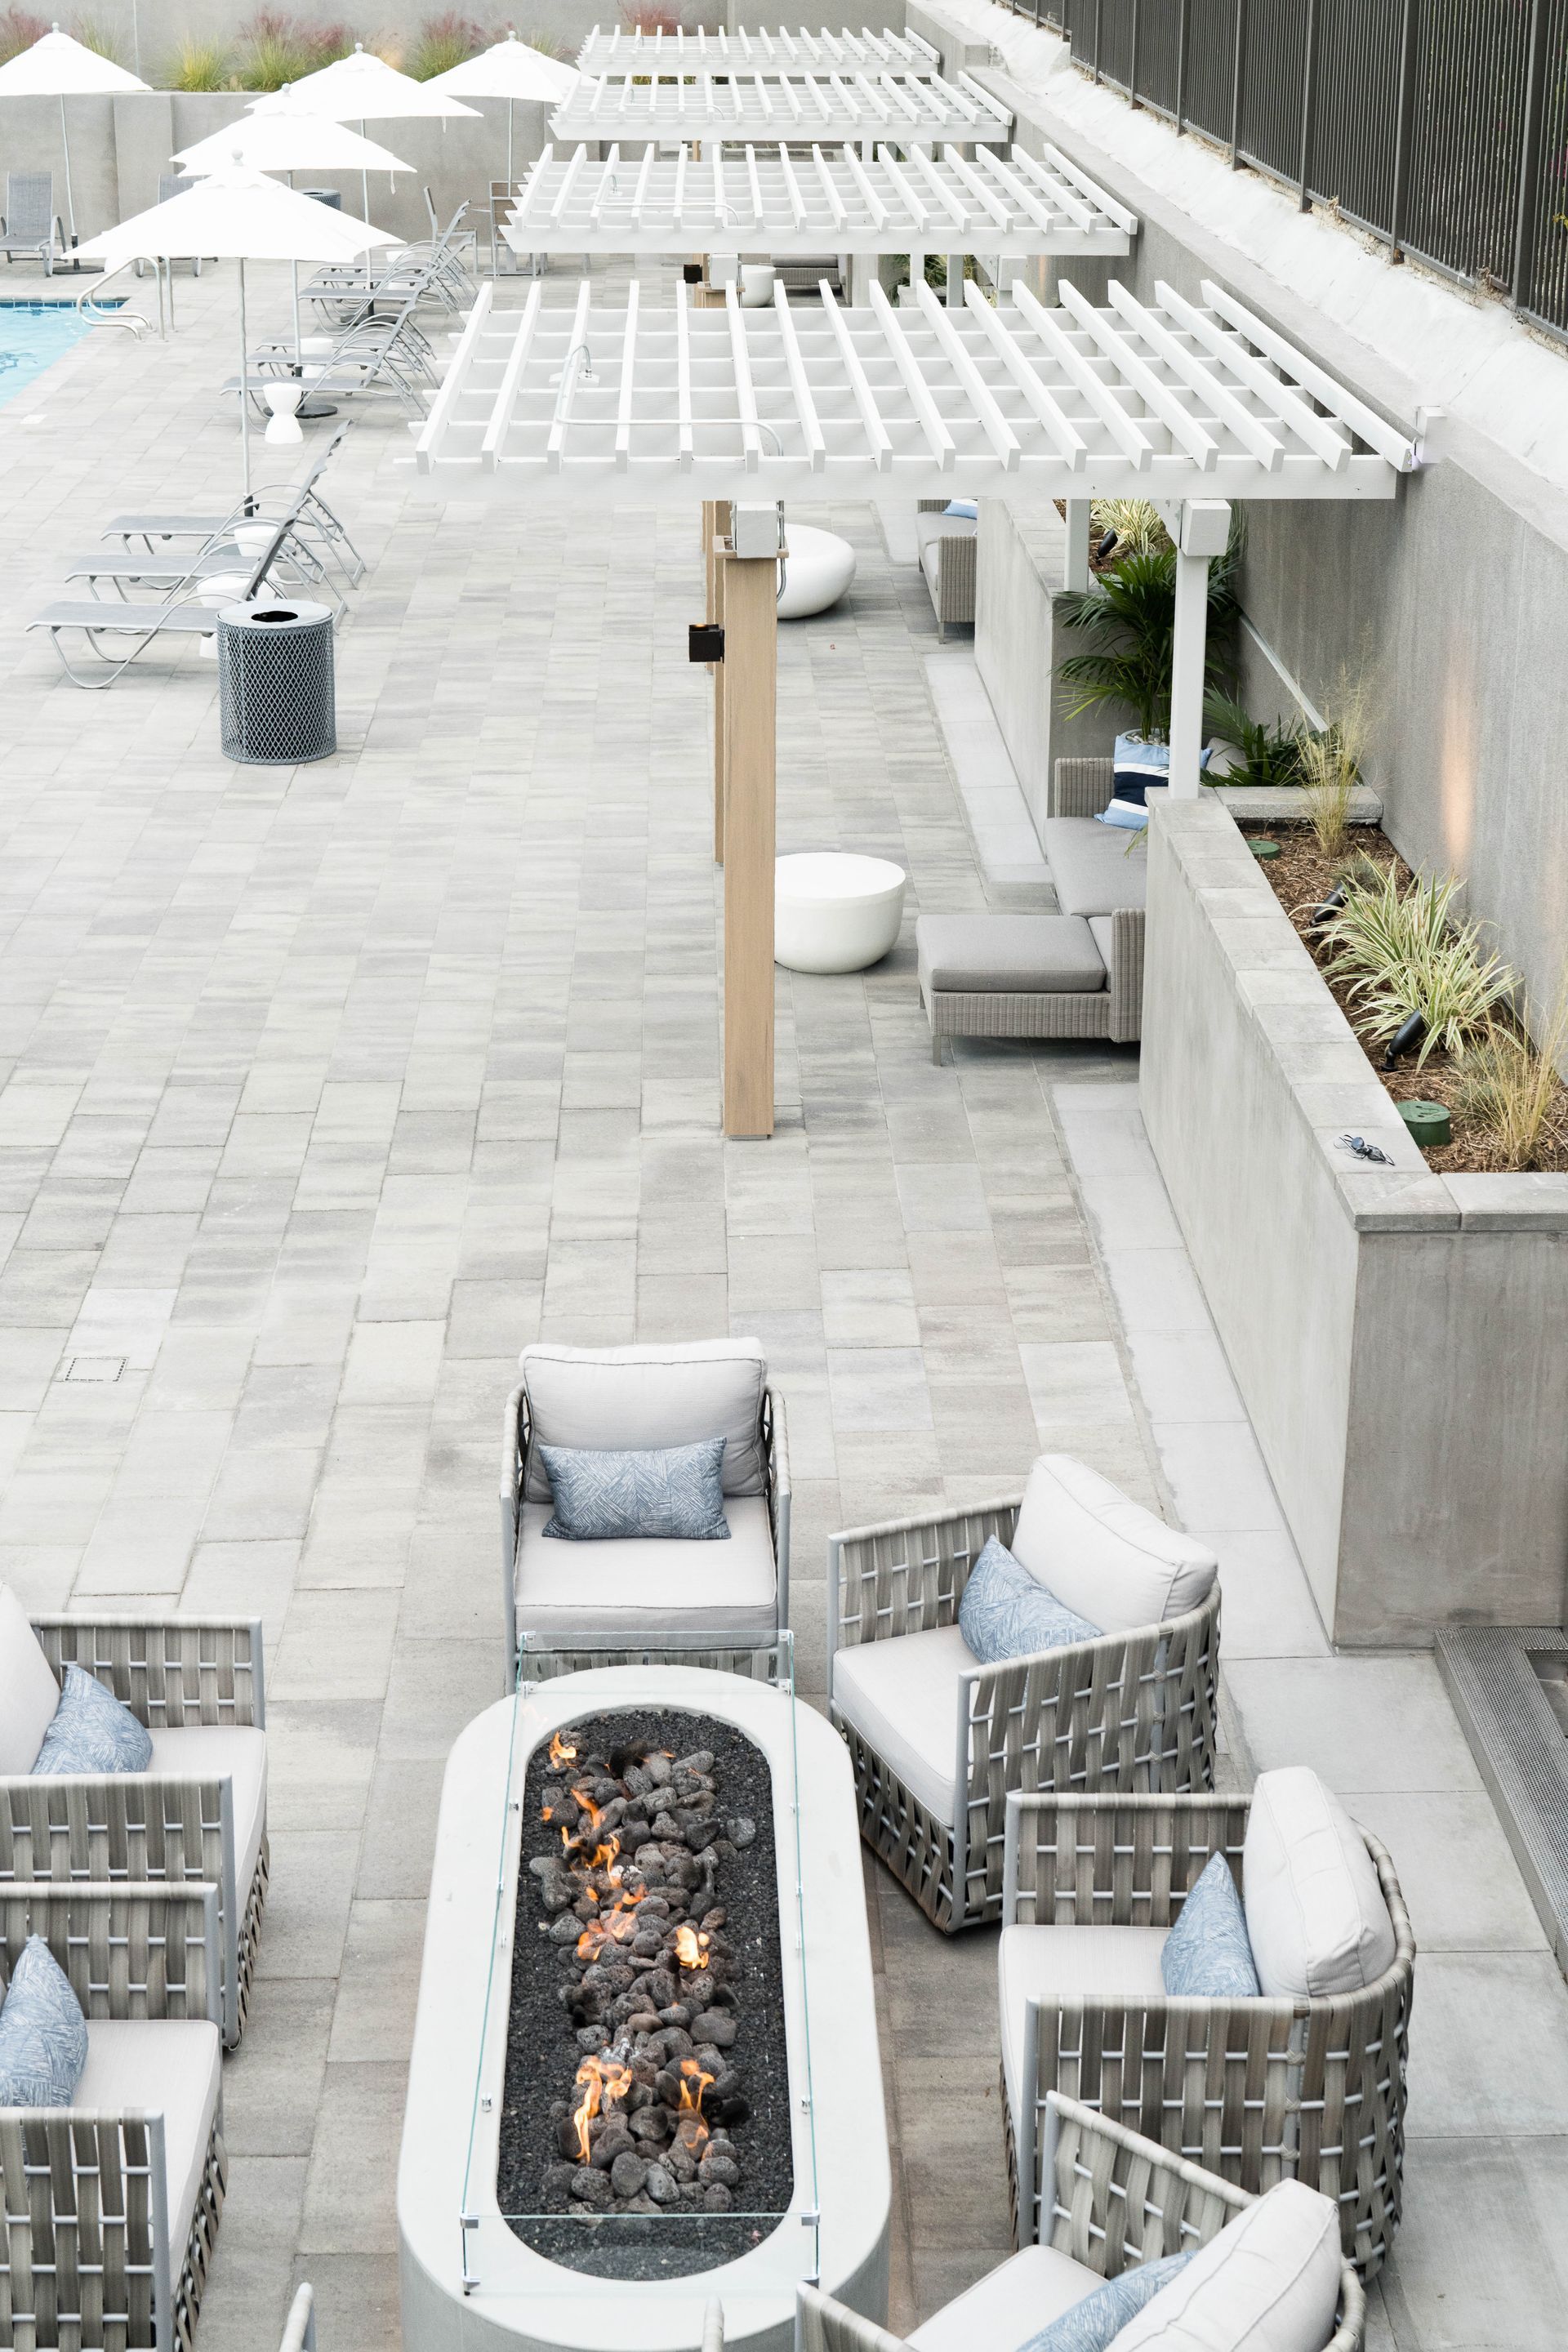 a patio area with a fire pit and chairs